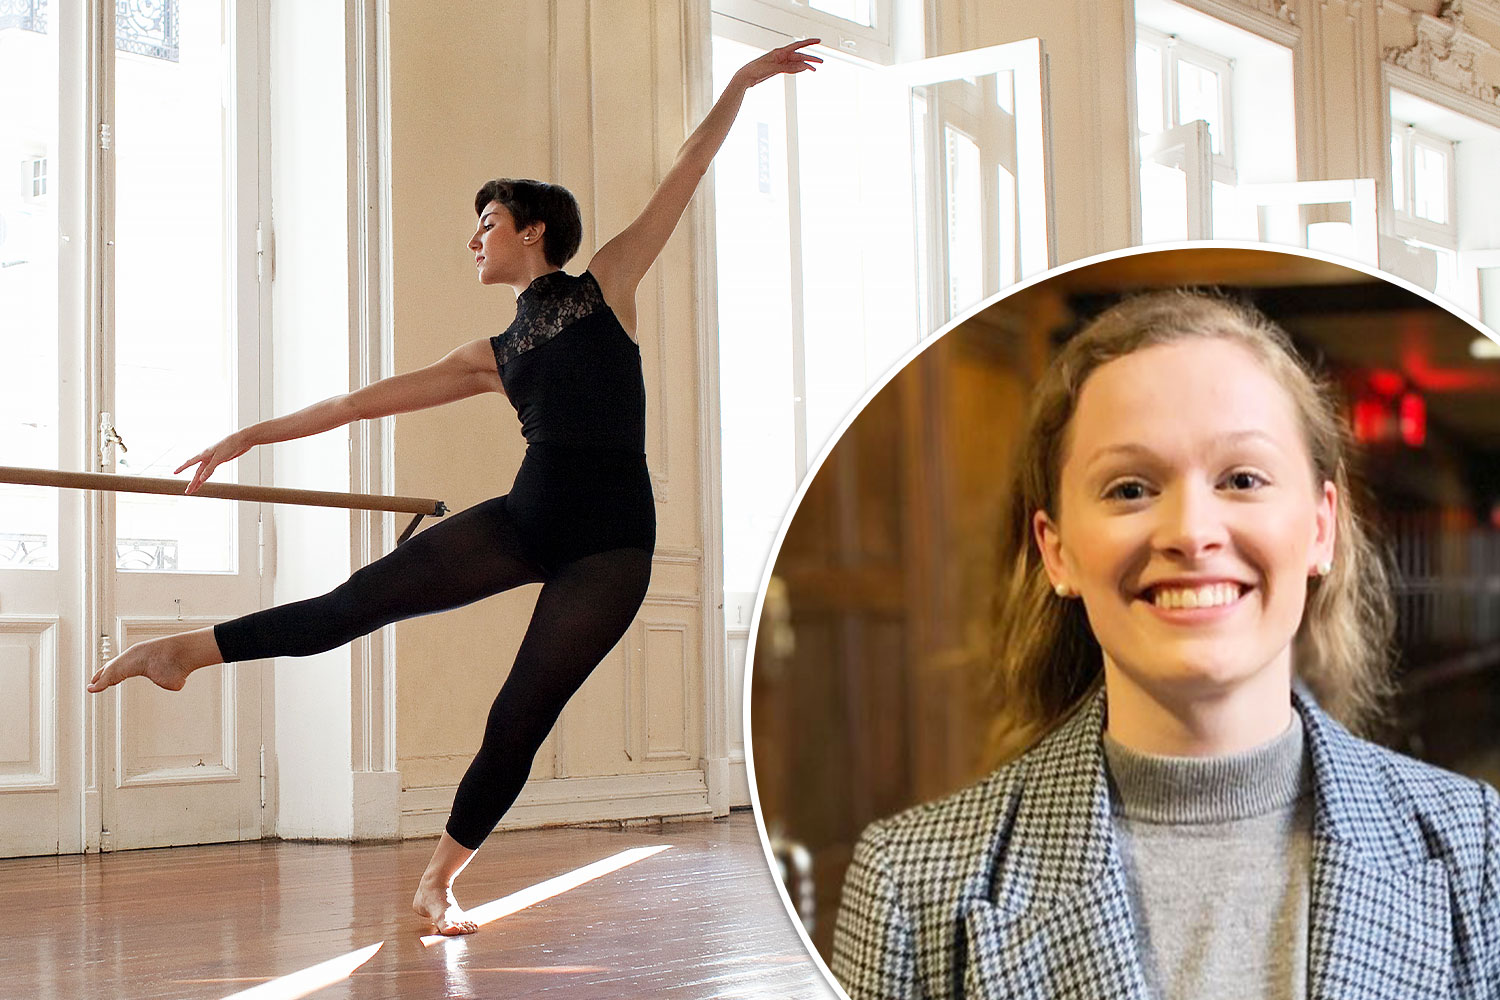 Ballet therapy provides a lift for multiple sclerosis patients